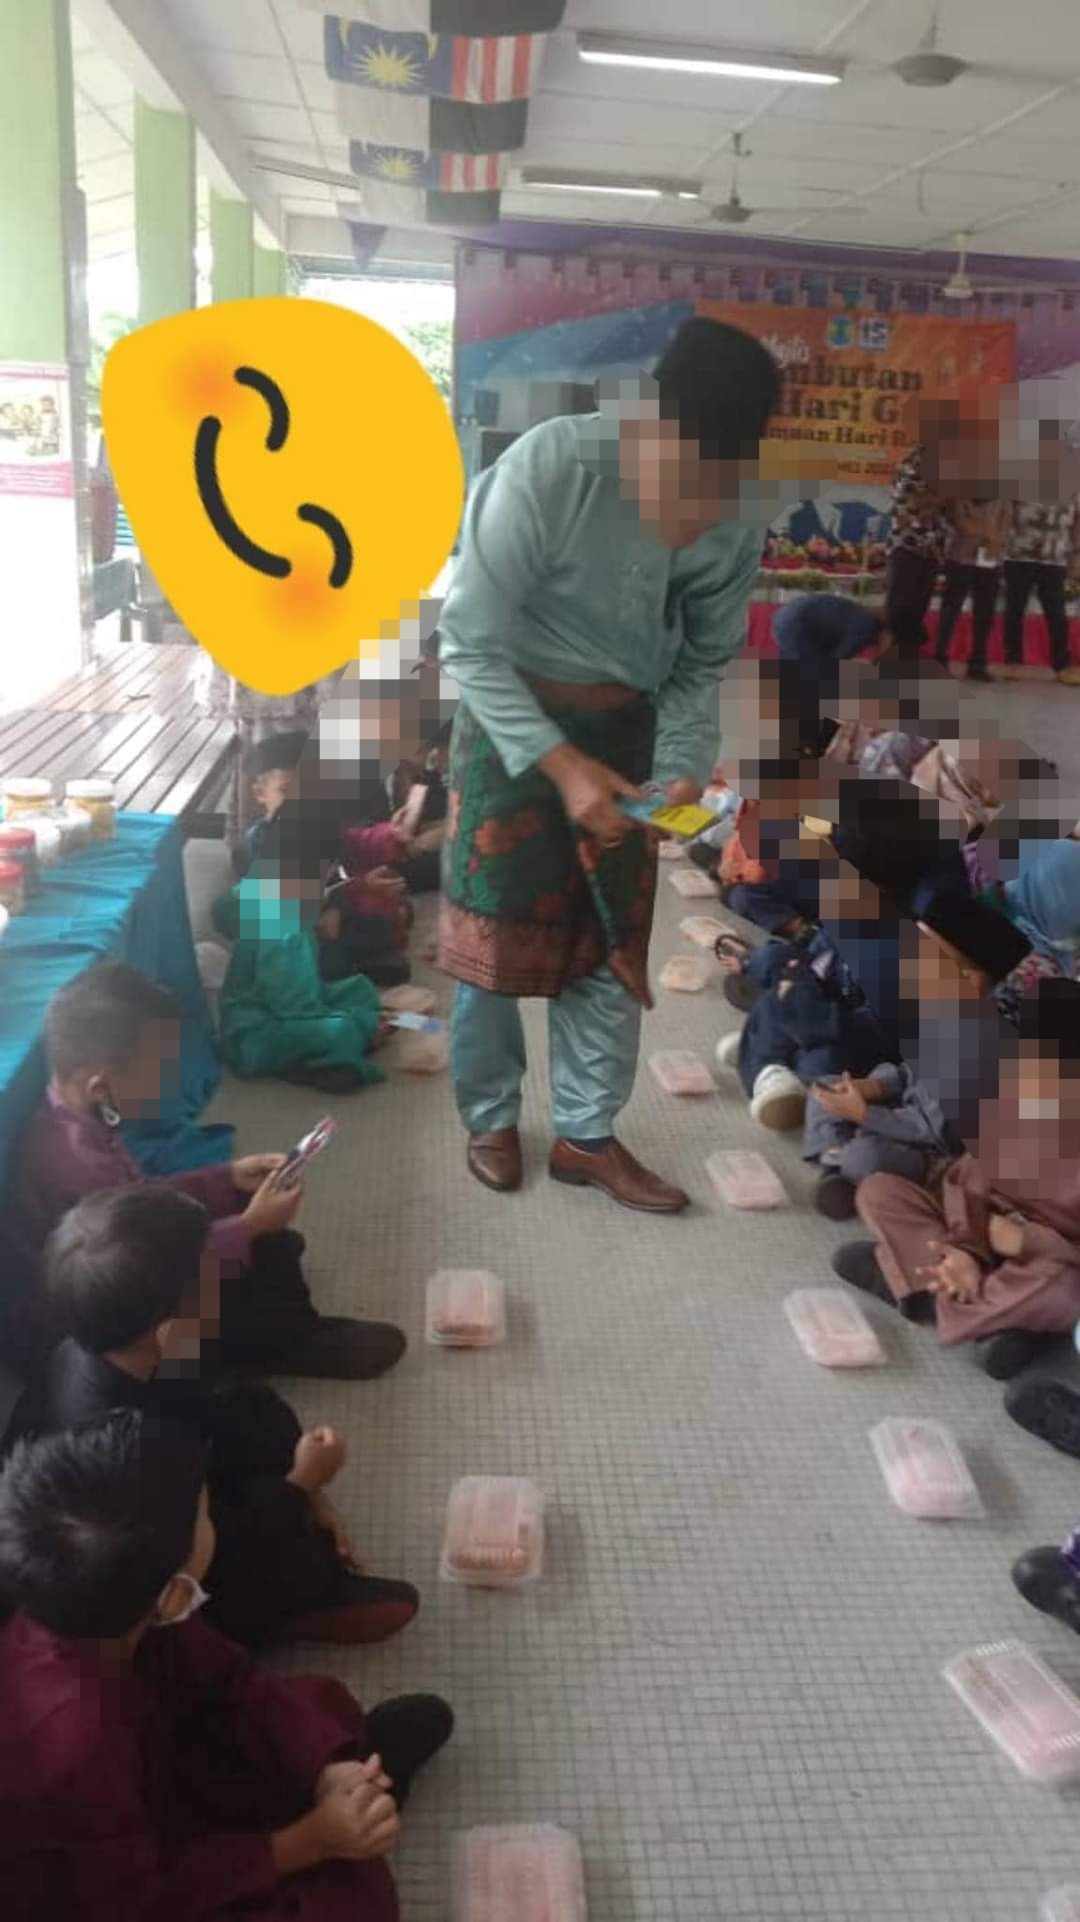 Students from a local school were allegedly seen dining on the floor, while teachers ate at banquet tables. Image credit: Mohd Fadli Salleh